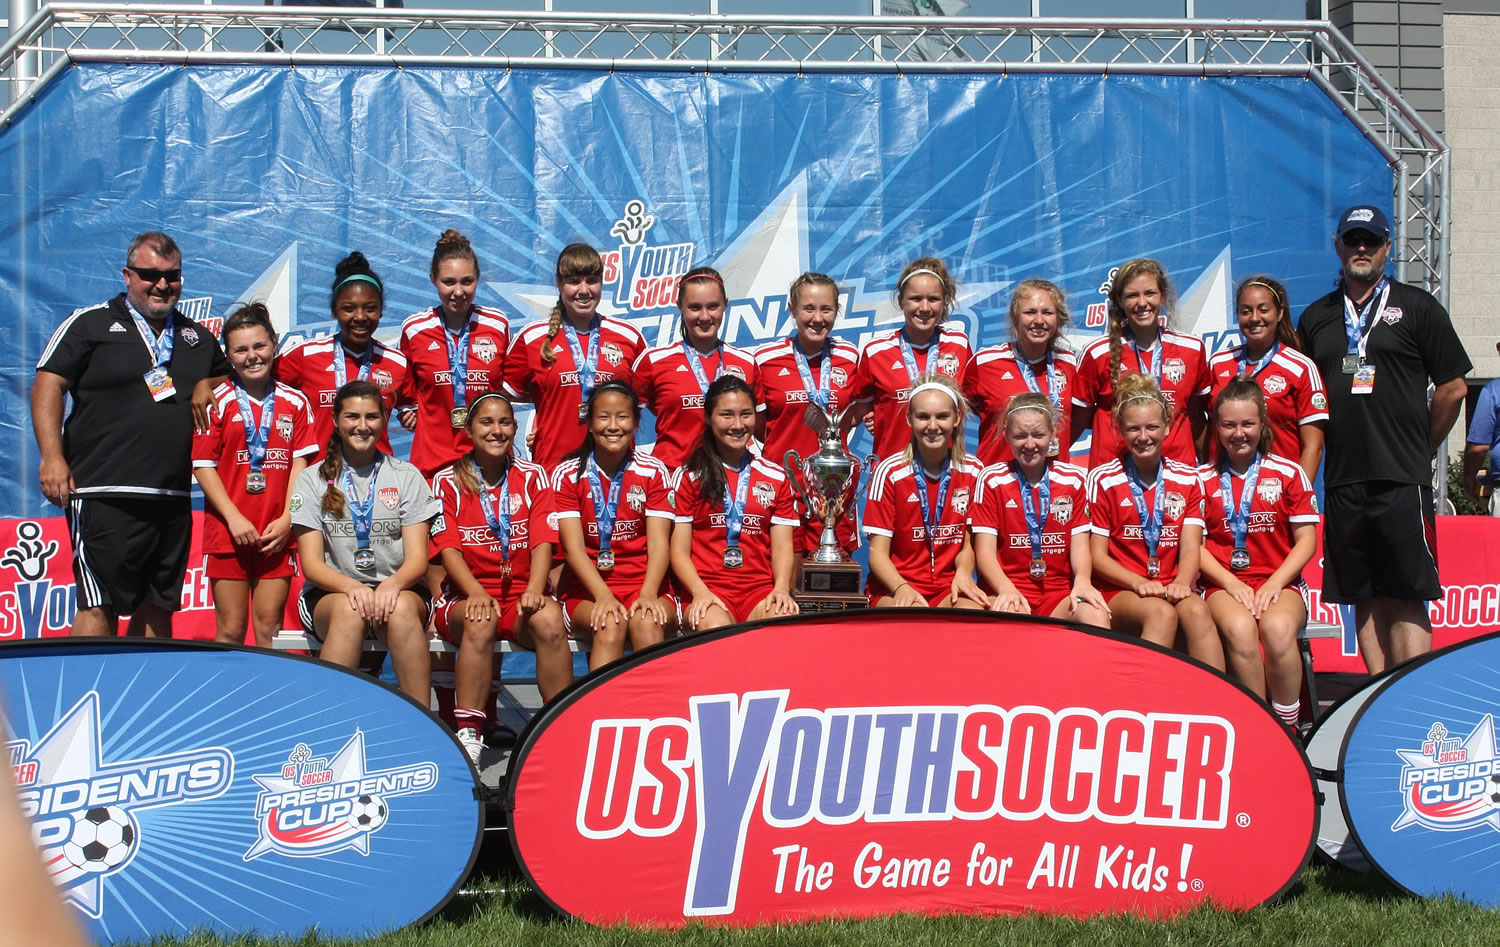 Washington Timbers G97 Green girls soccer team of Vancouver at the awards ceremony for winning the under-17 National Presidents Cup title on Sunday, July 12, 2015, at Overland Park, Kansas.